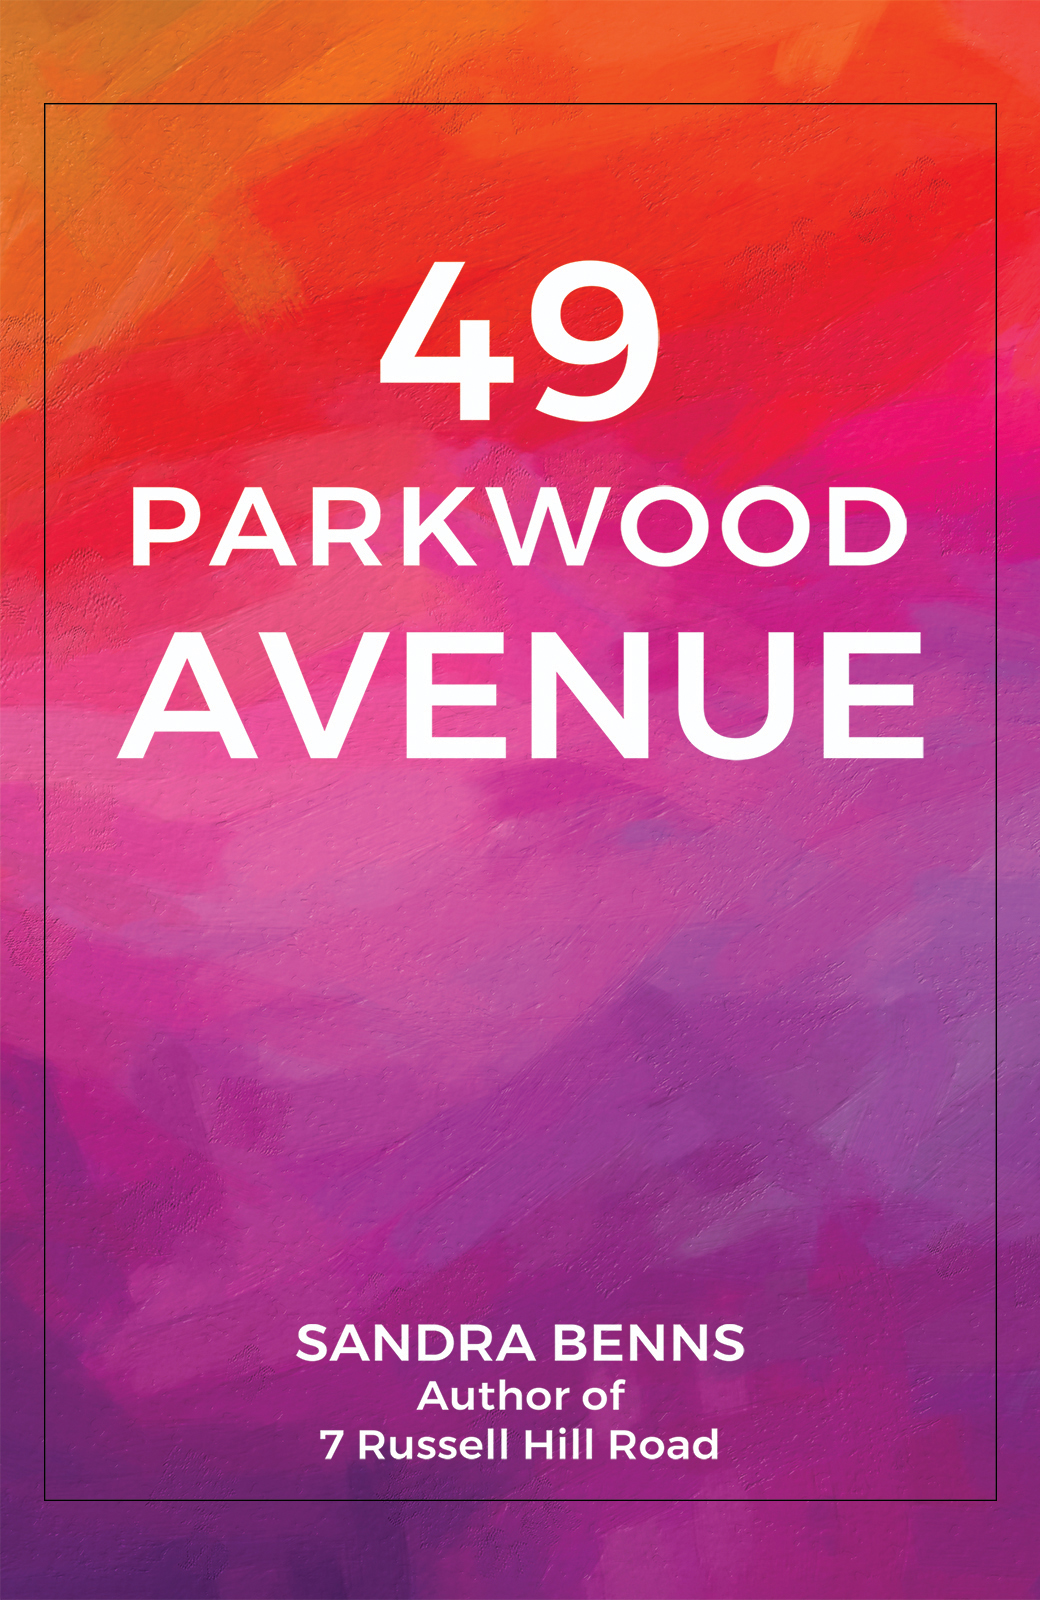 This image is the cover for the book 49 Parkwood Avenue